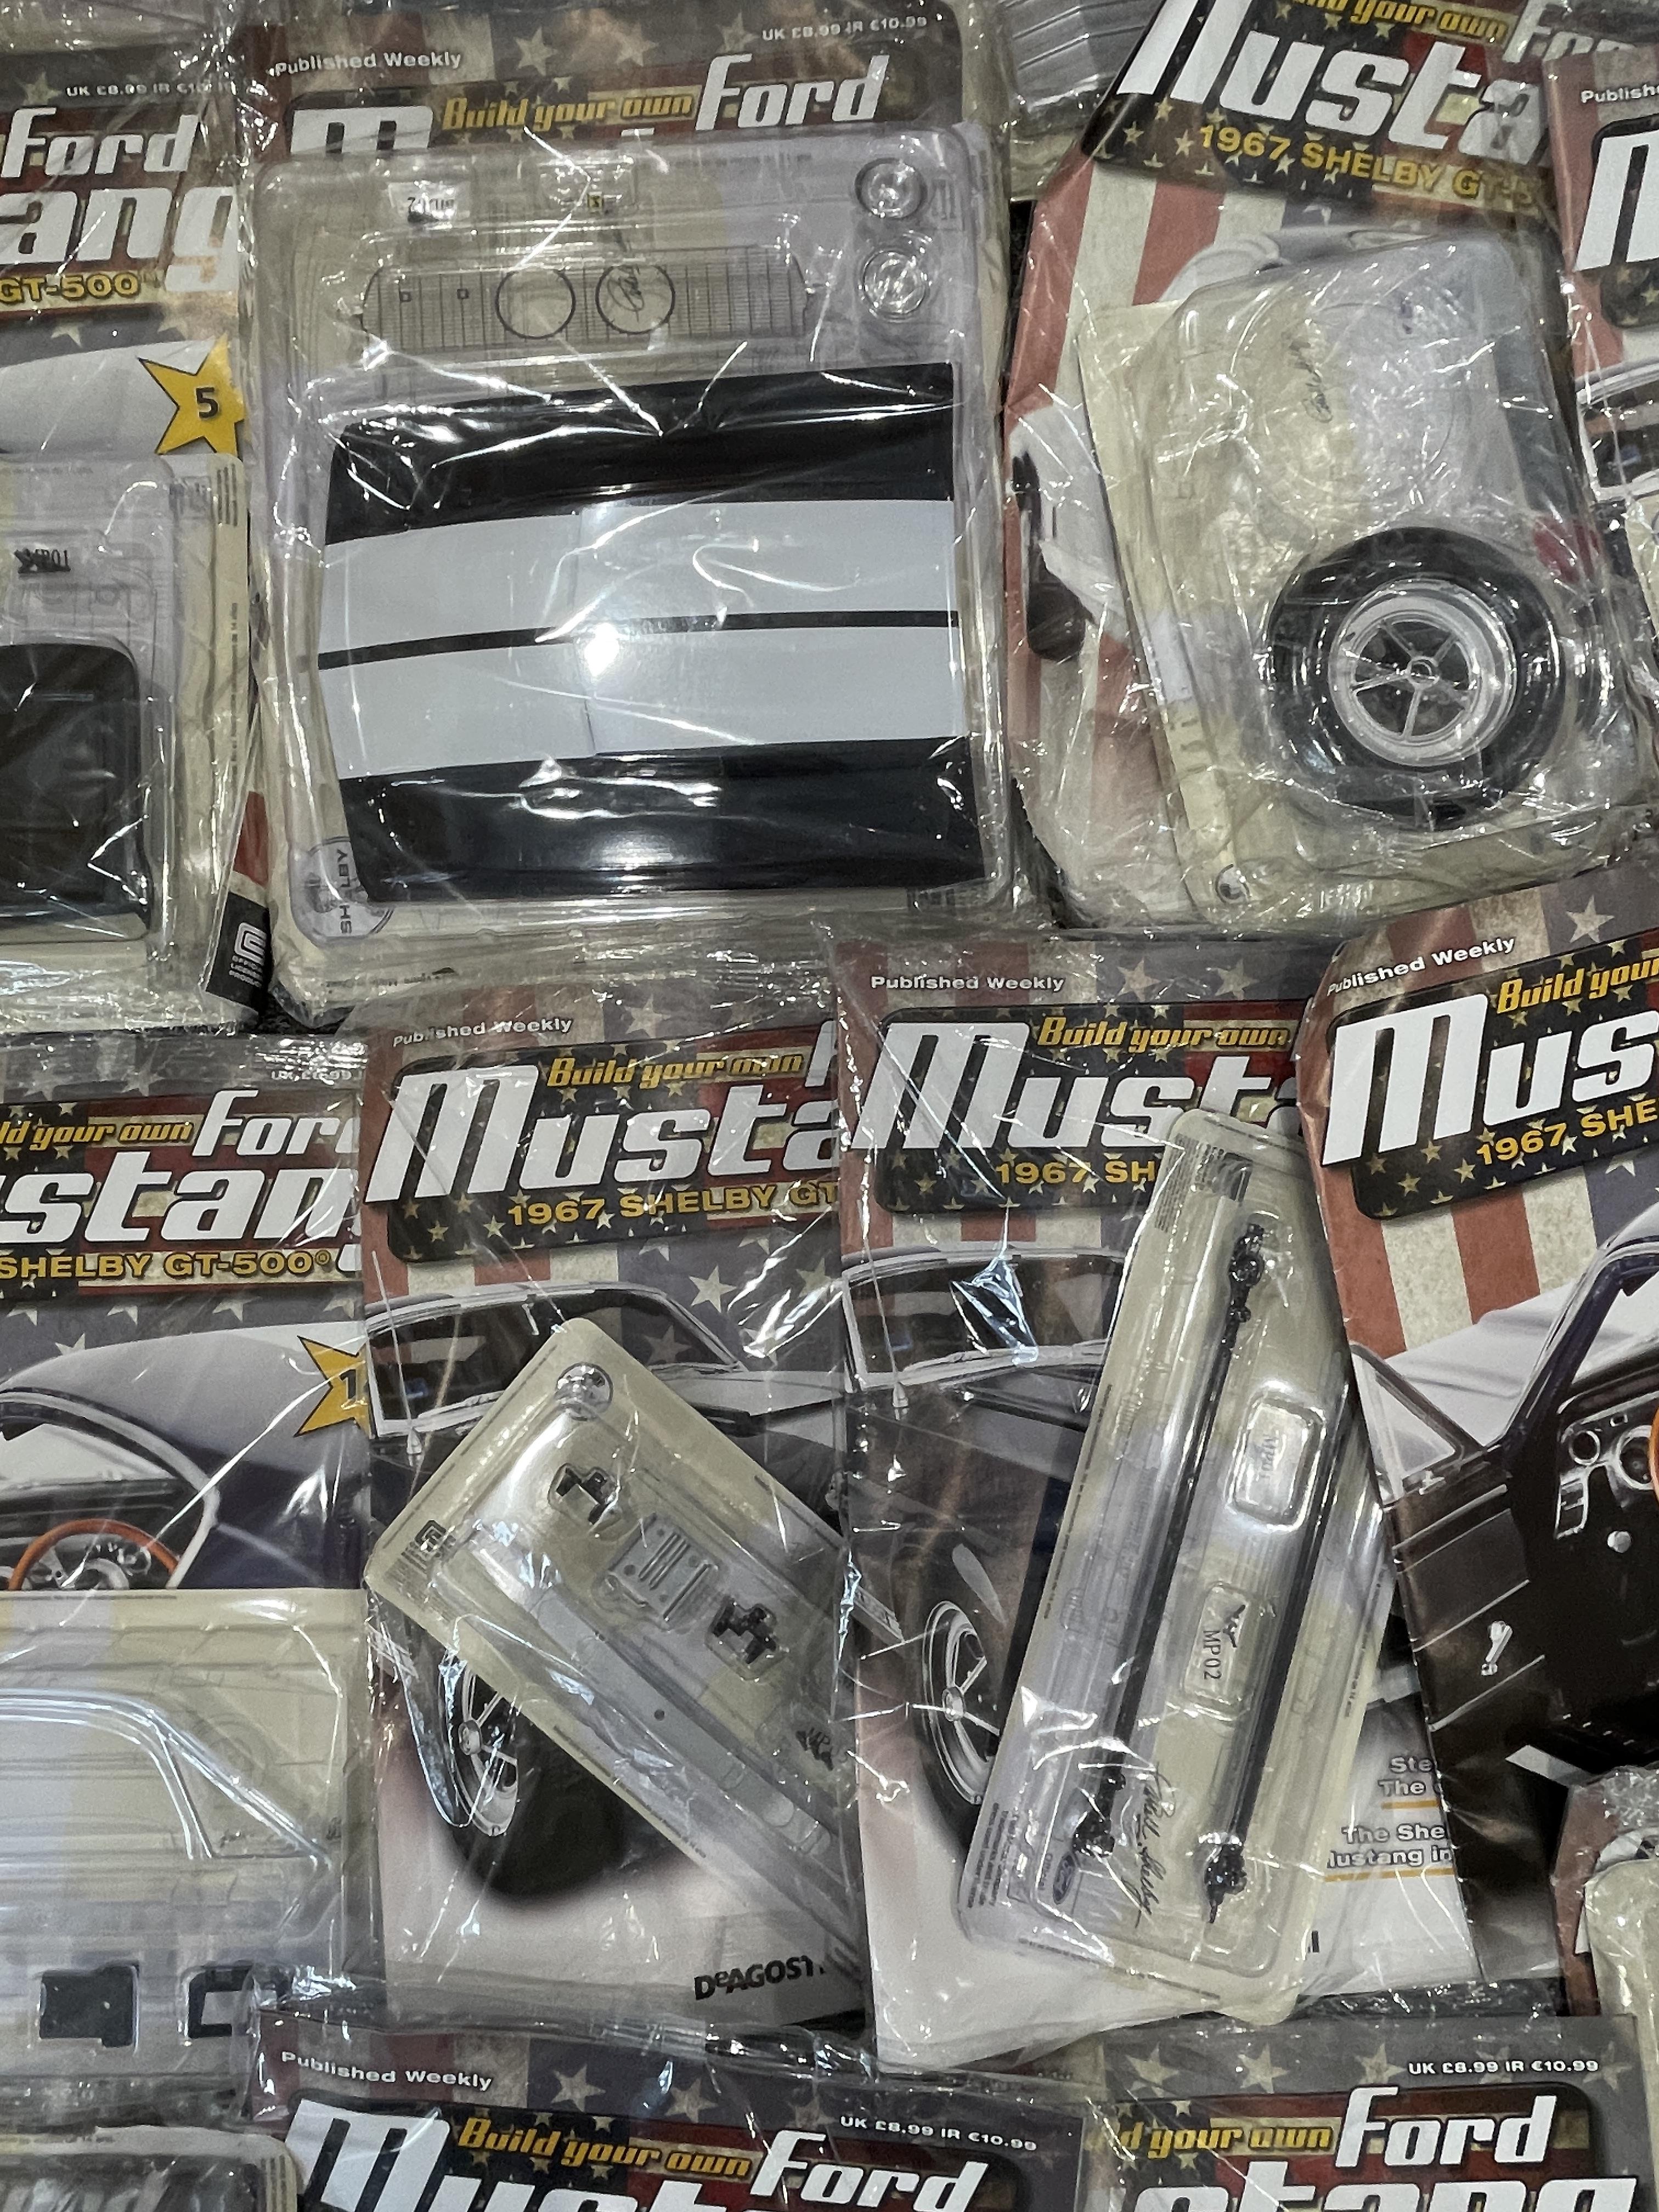 Mixed lot of Mustang Magazines and Parts for model cars - Image 13 of 20